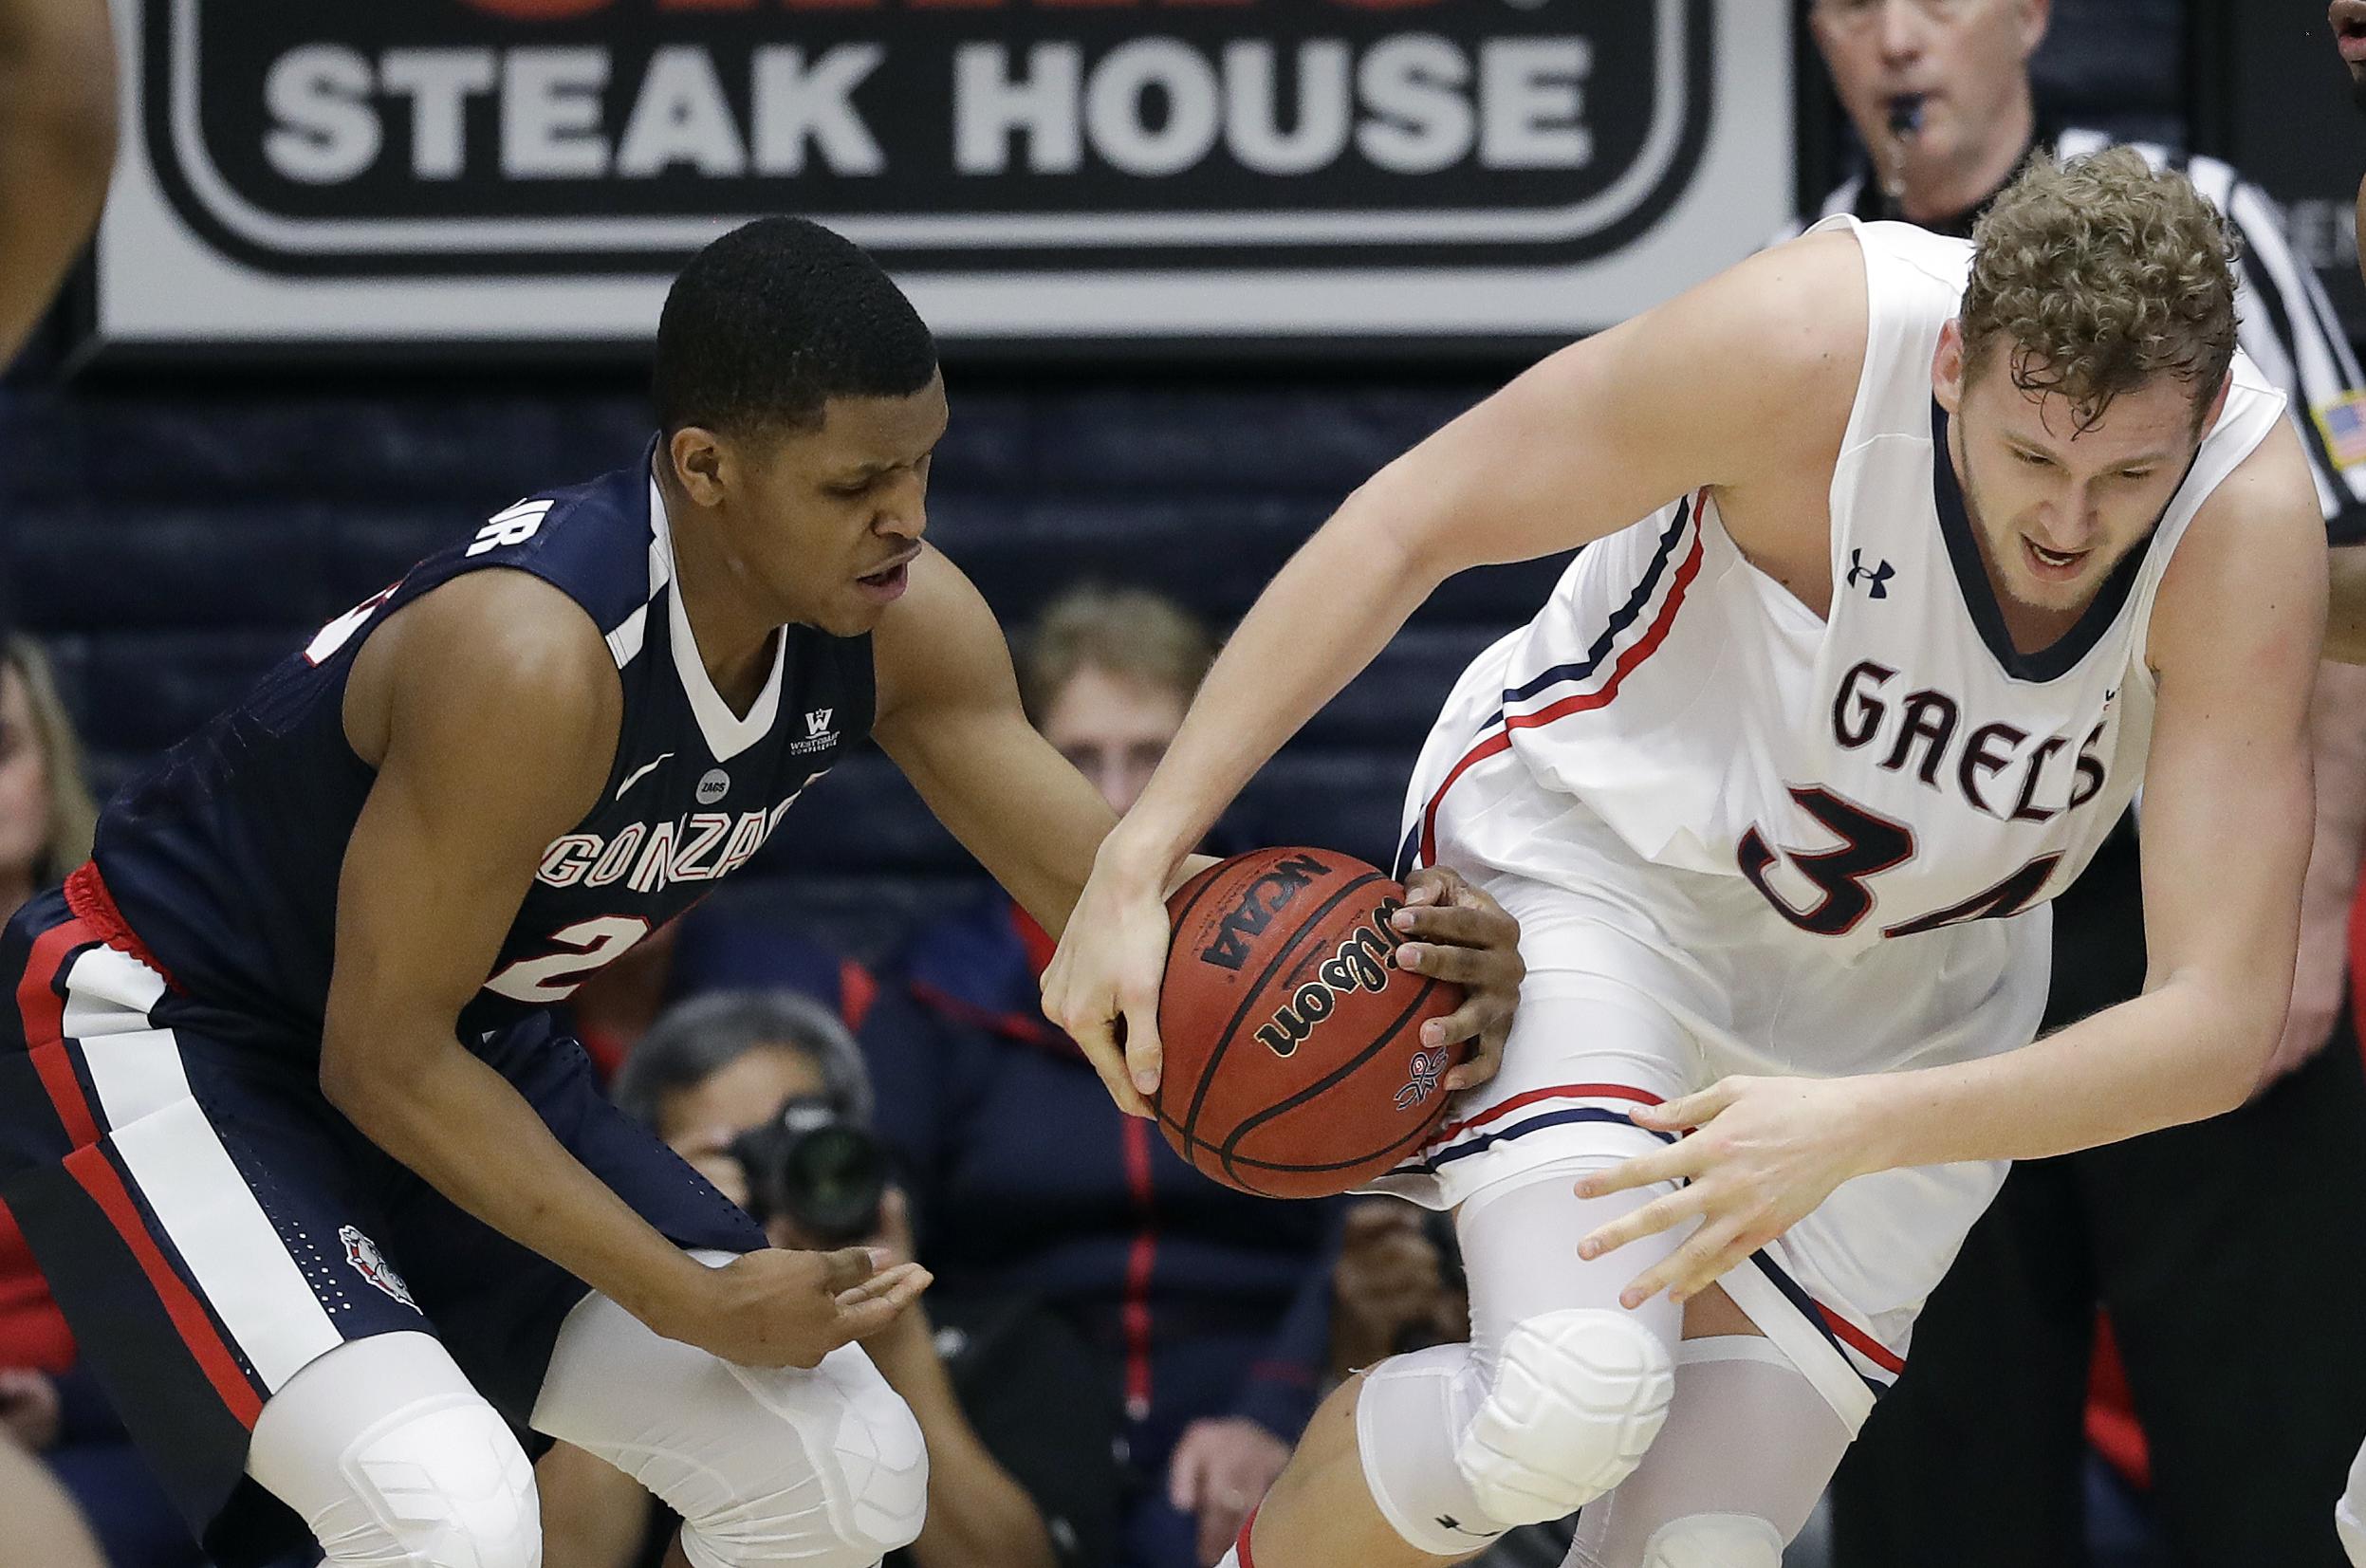 gonzaga men open west coast conference schedule at home, closes on